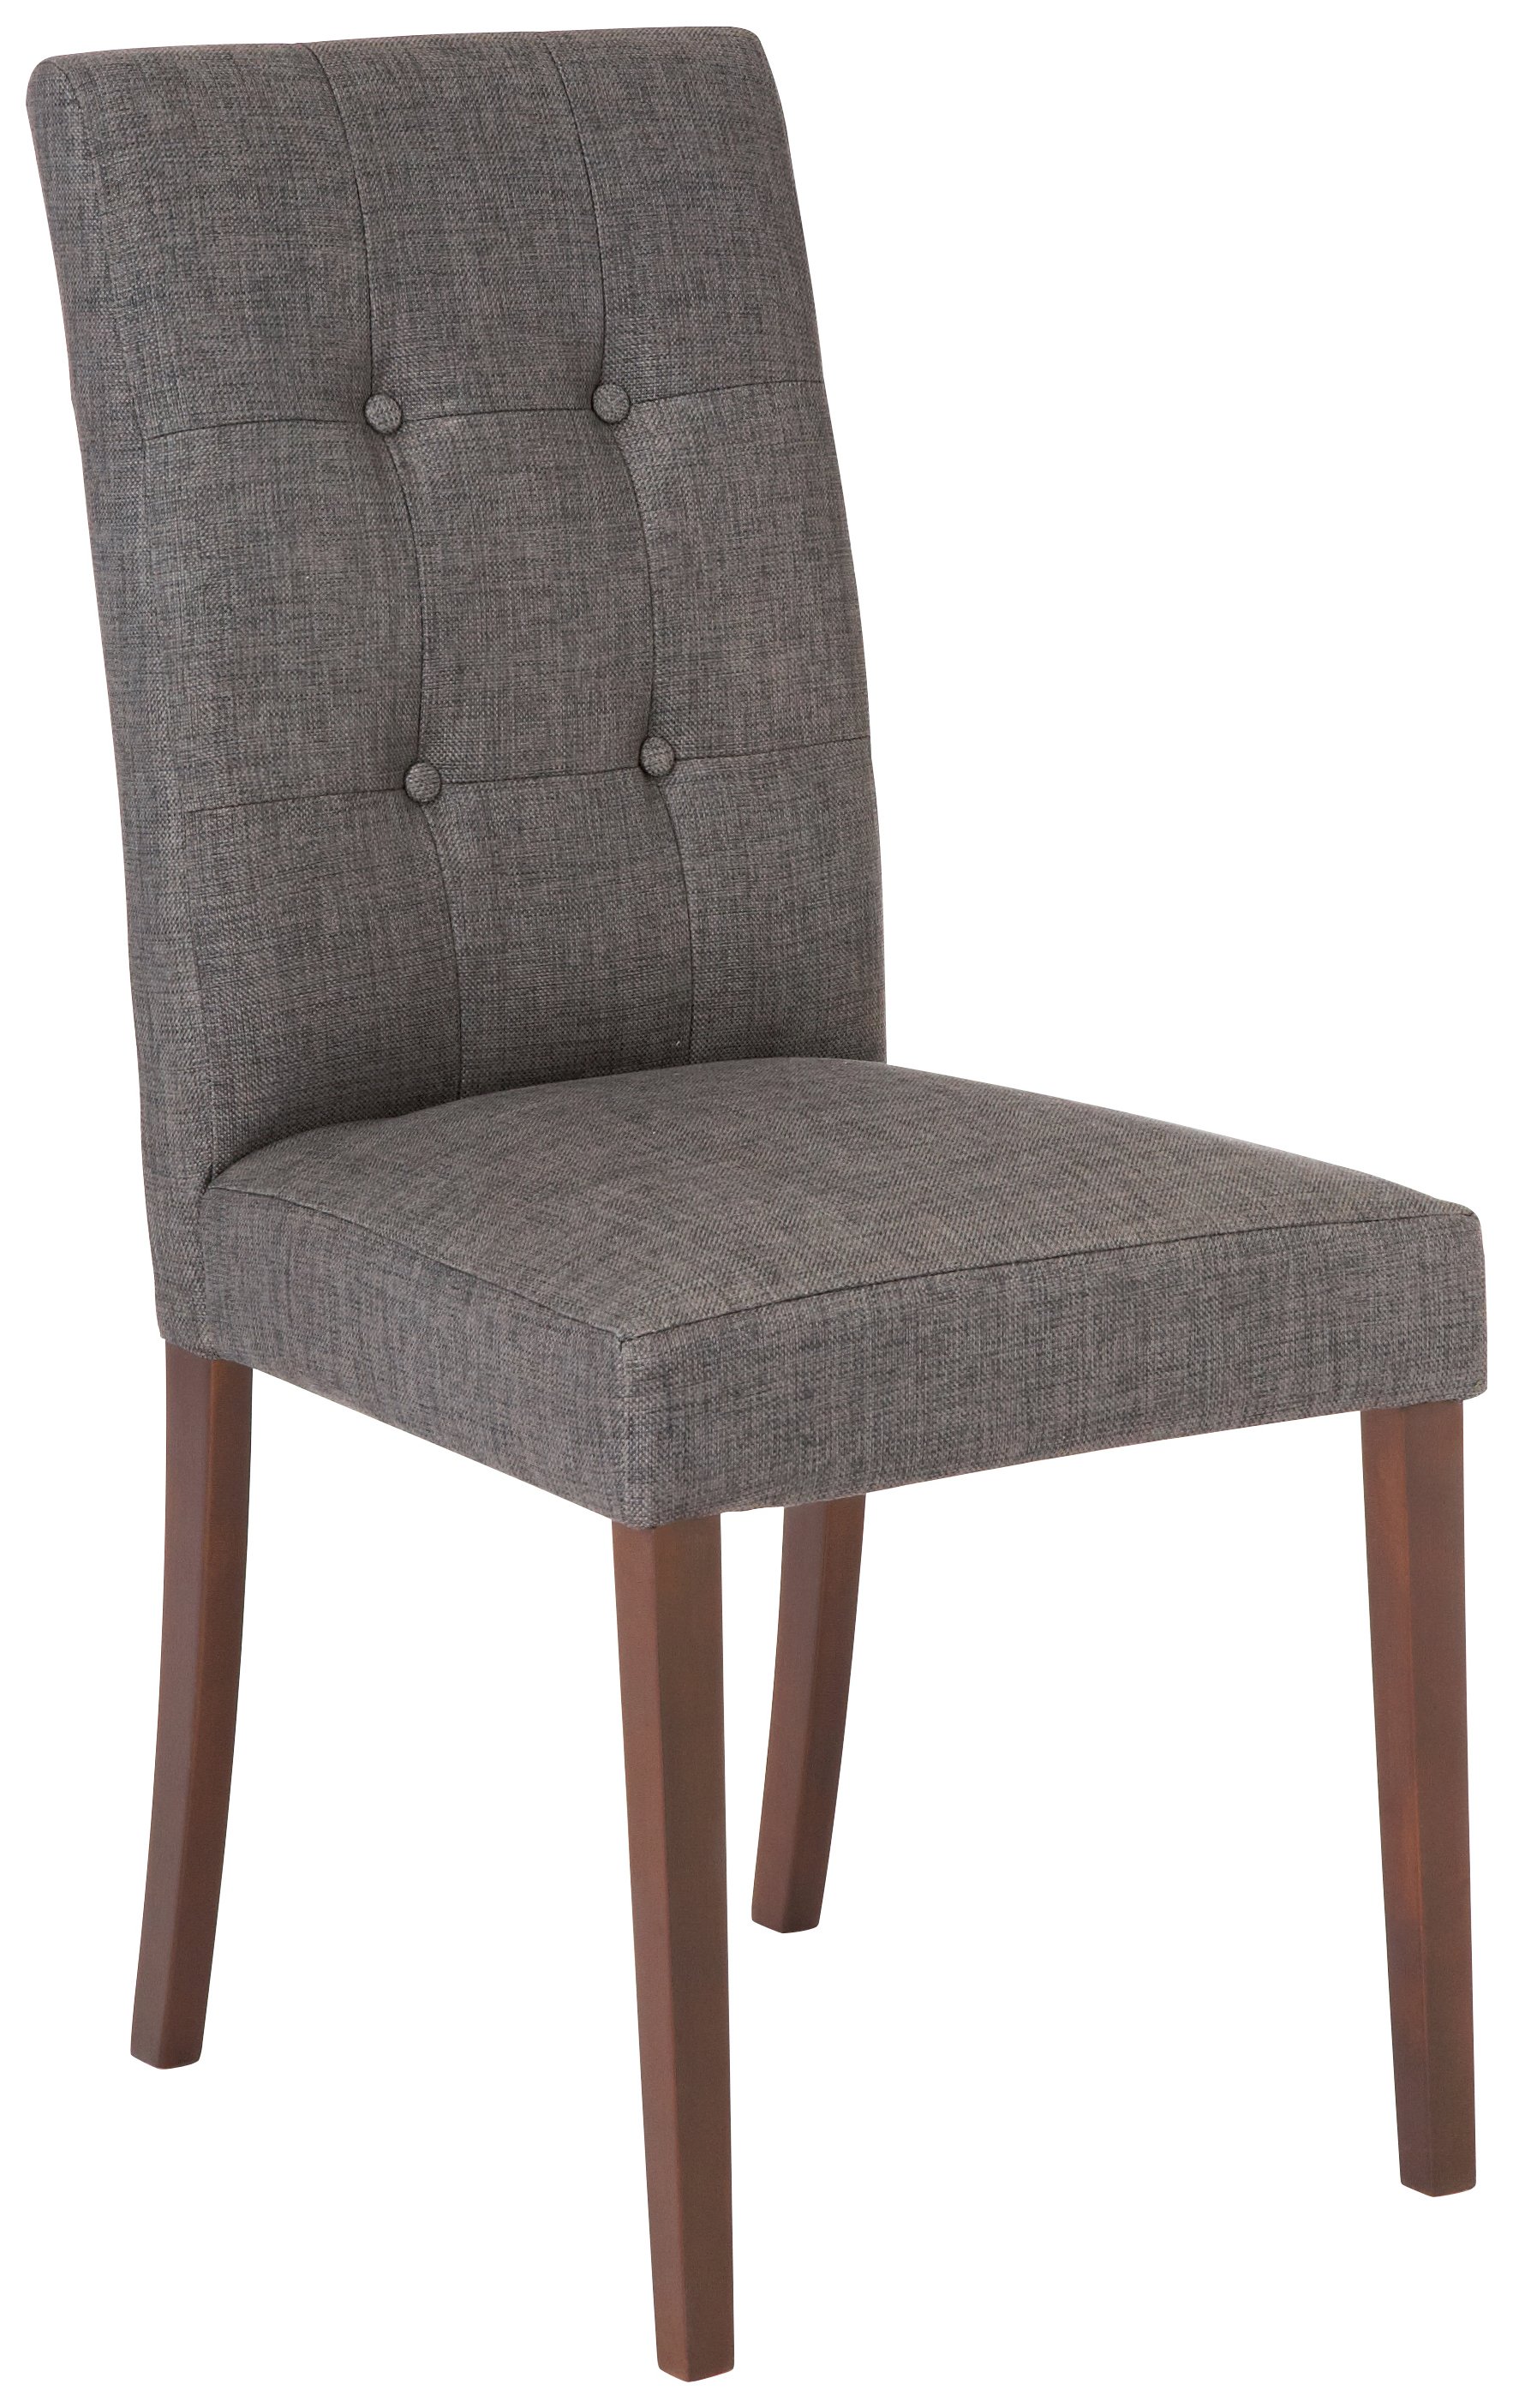 Collection Adaline Pair of Walnut Effect Dining Chairs. Review